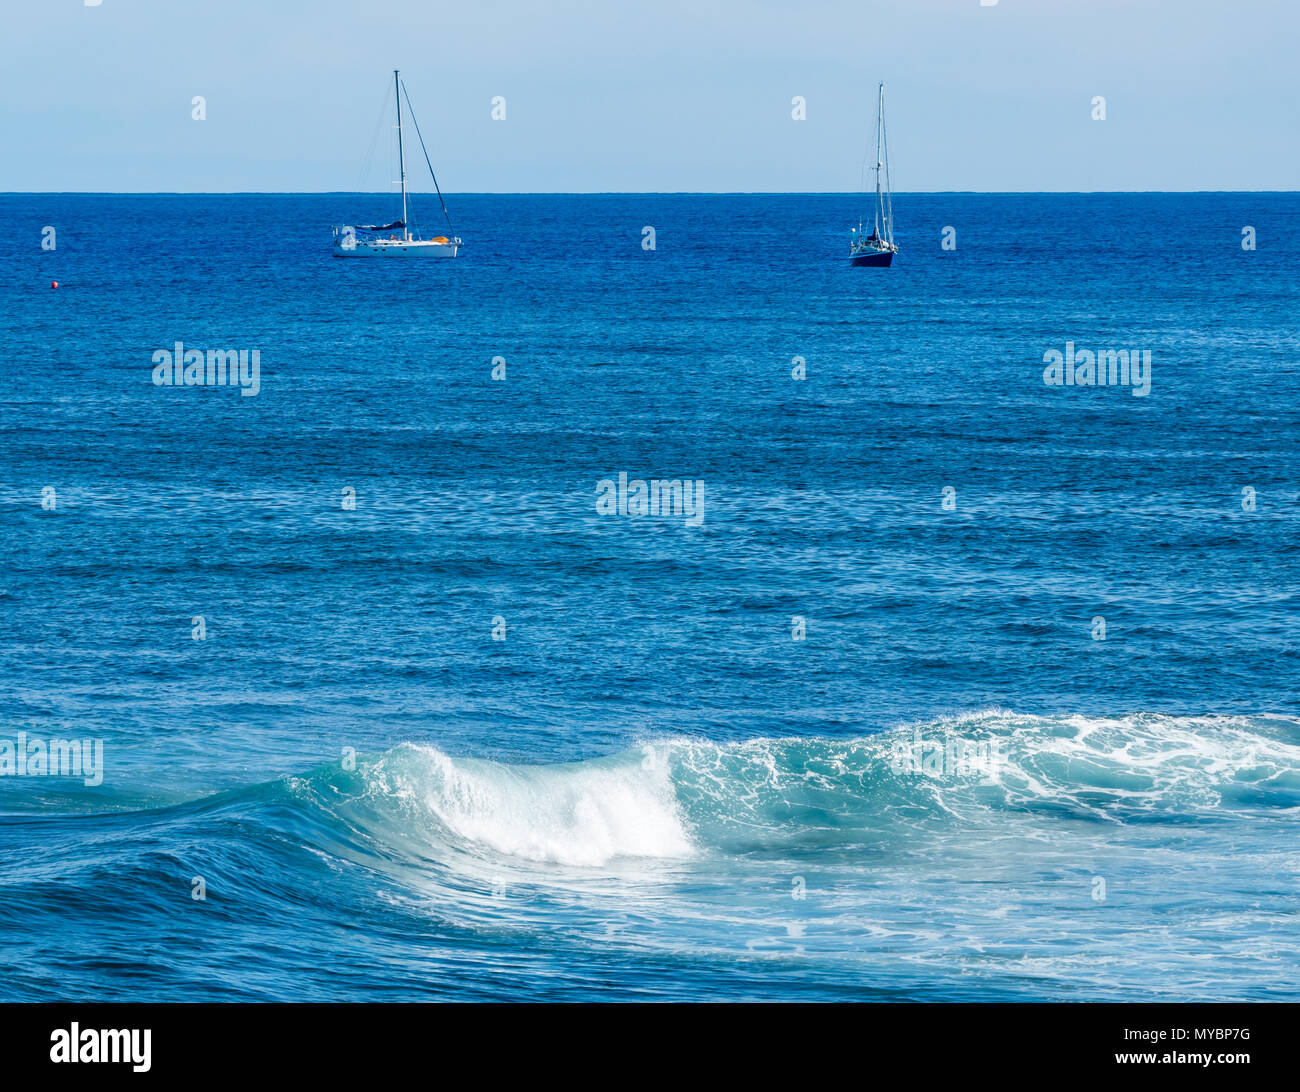 Idyllic Pacific Ocean view with anchored sailing boats and wave crest Stock Photo